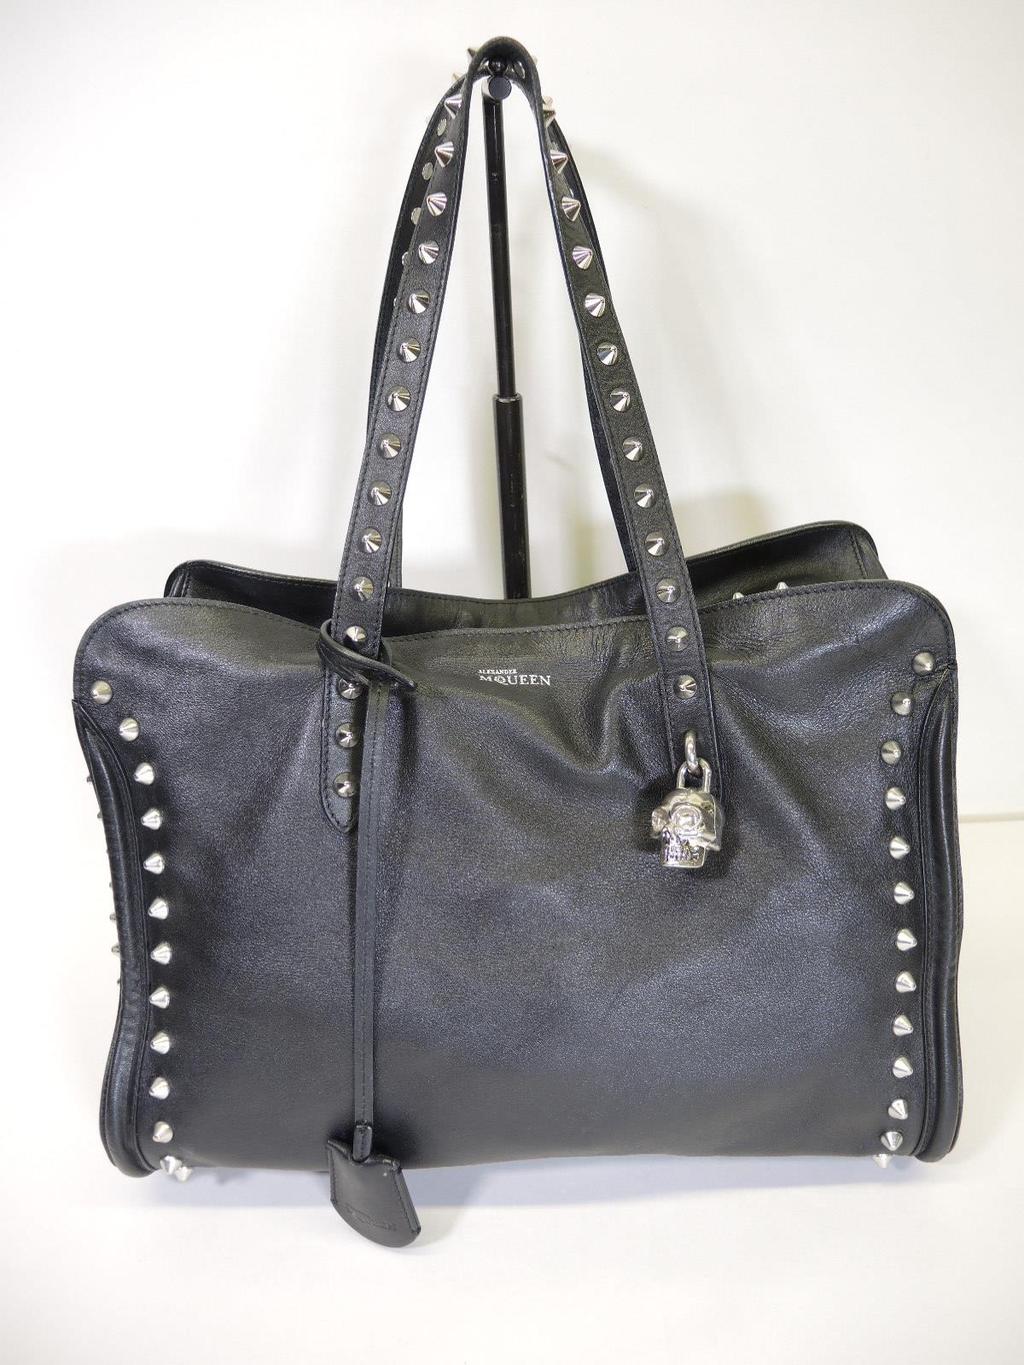 ALEXANDER McQUEEN Black 'Medium Studded Skull Padlock Tote' Retailed for $1995, sold in one day for $699.